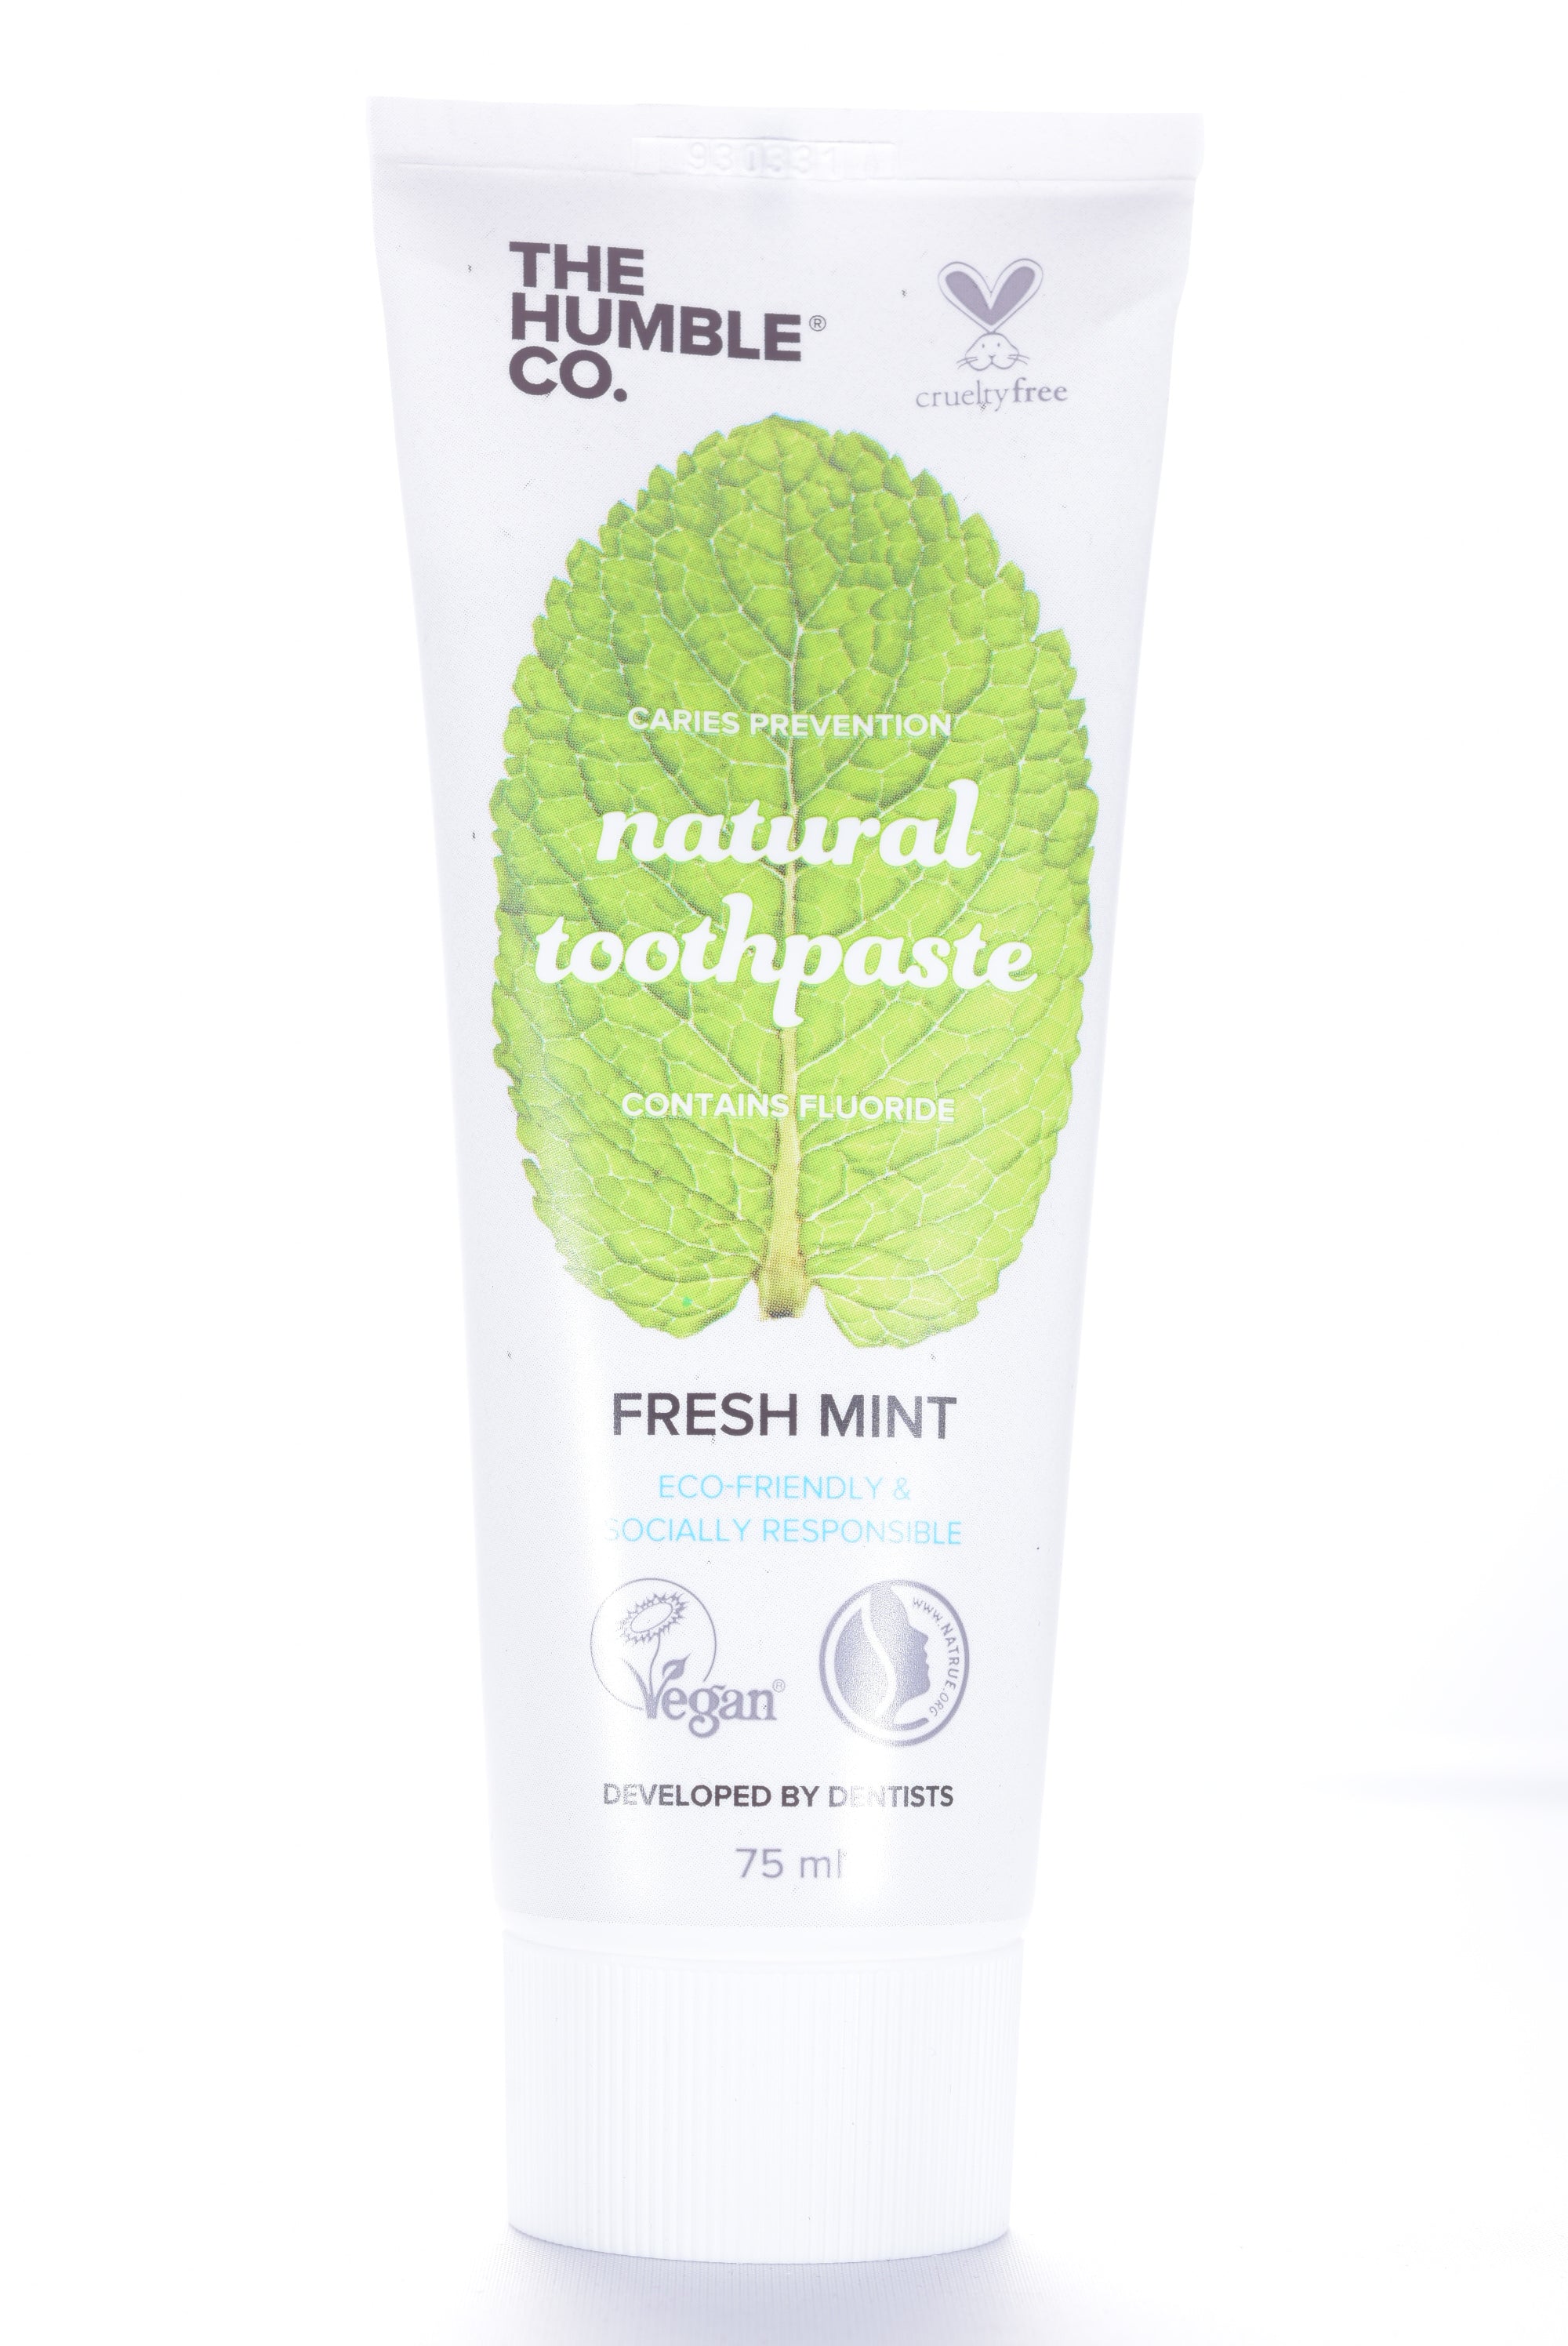 The Humble Co Natural Toothpaste (VEGAN)